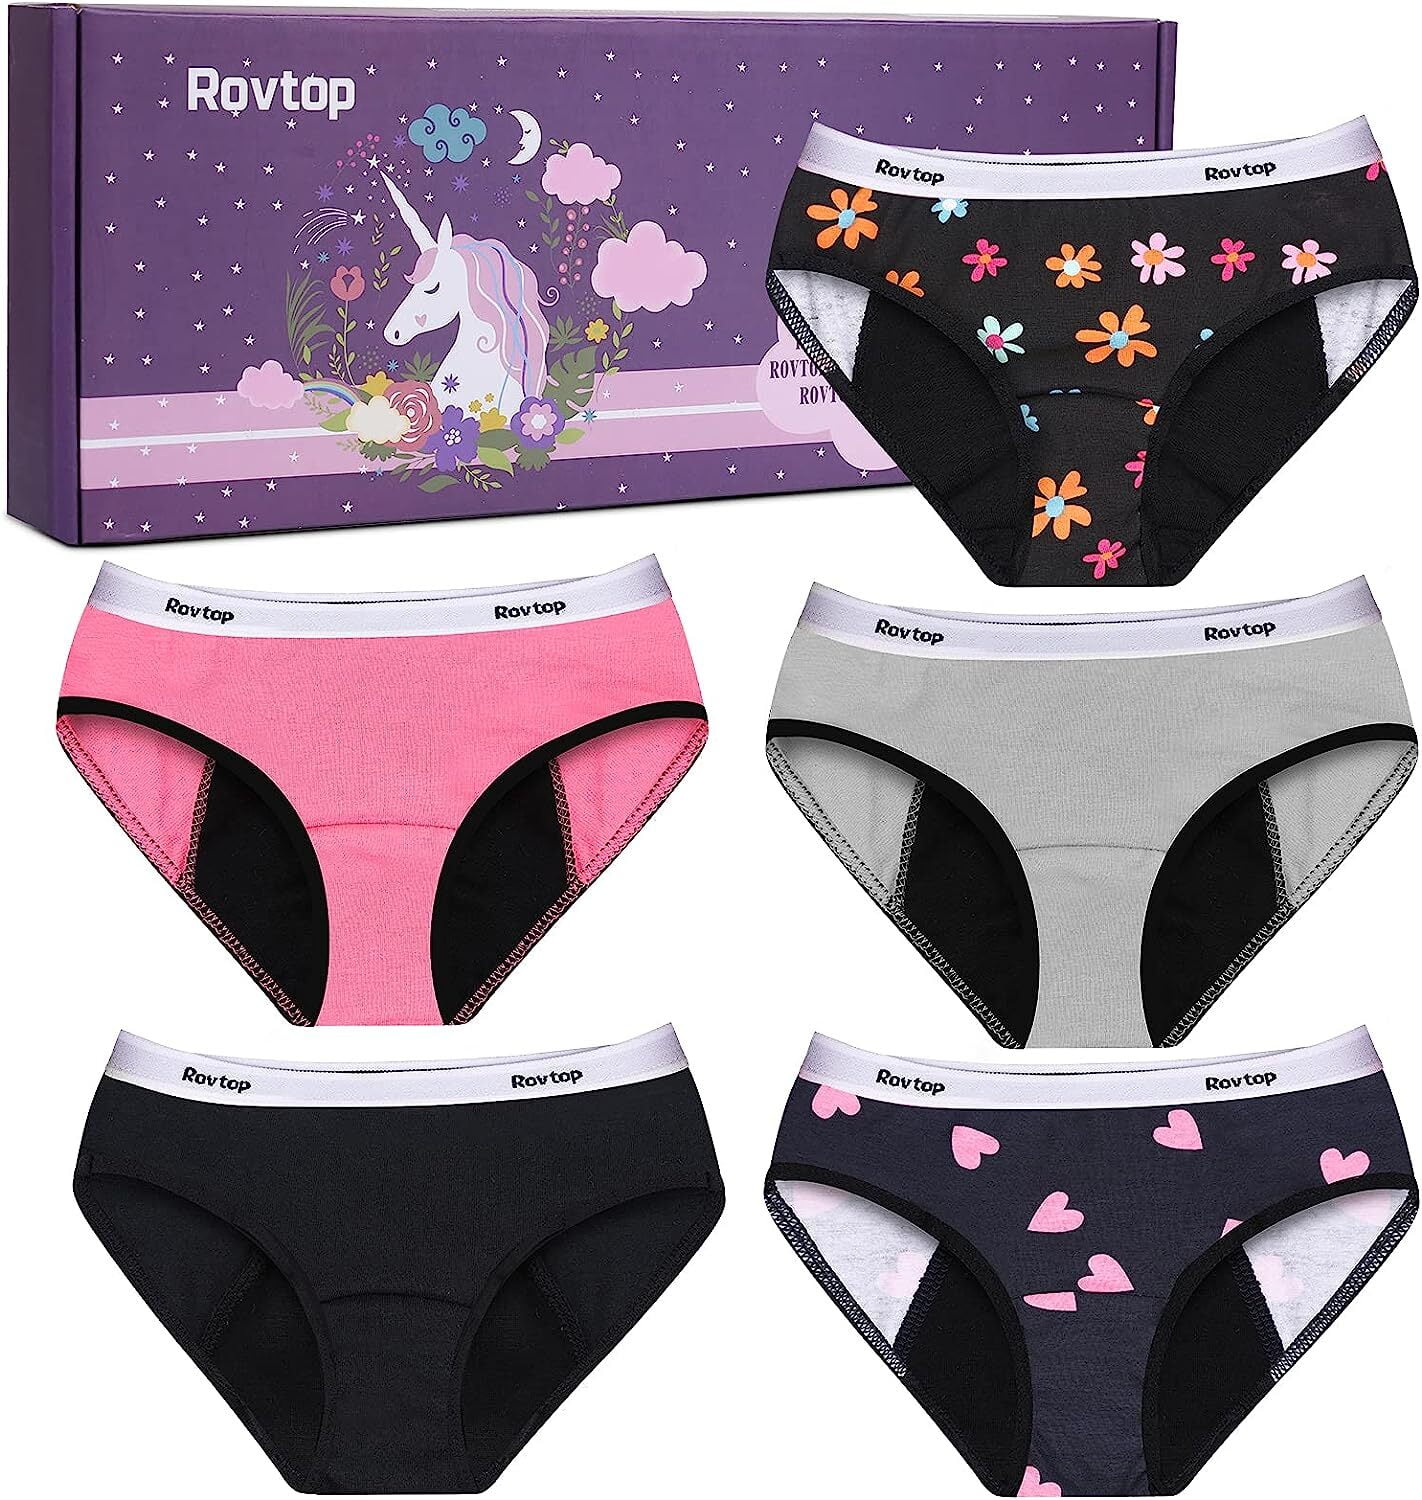 Rovtop Girls Period Underwear for Teens, Cotton Leak Proof Panties Reusable  Menstrual Protective Briefs for Girls 8-16 Years, 5 Pack